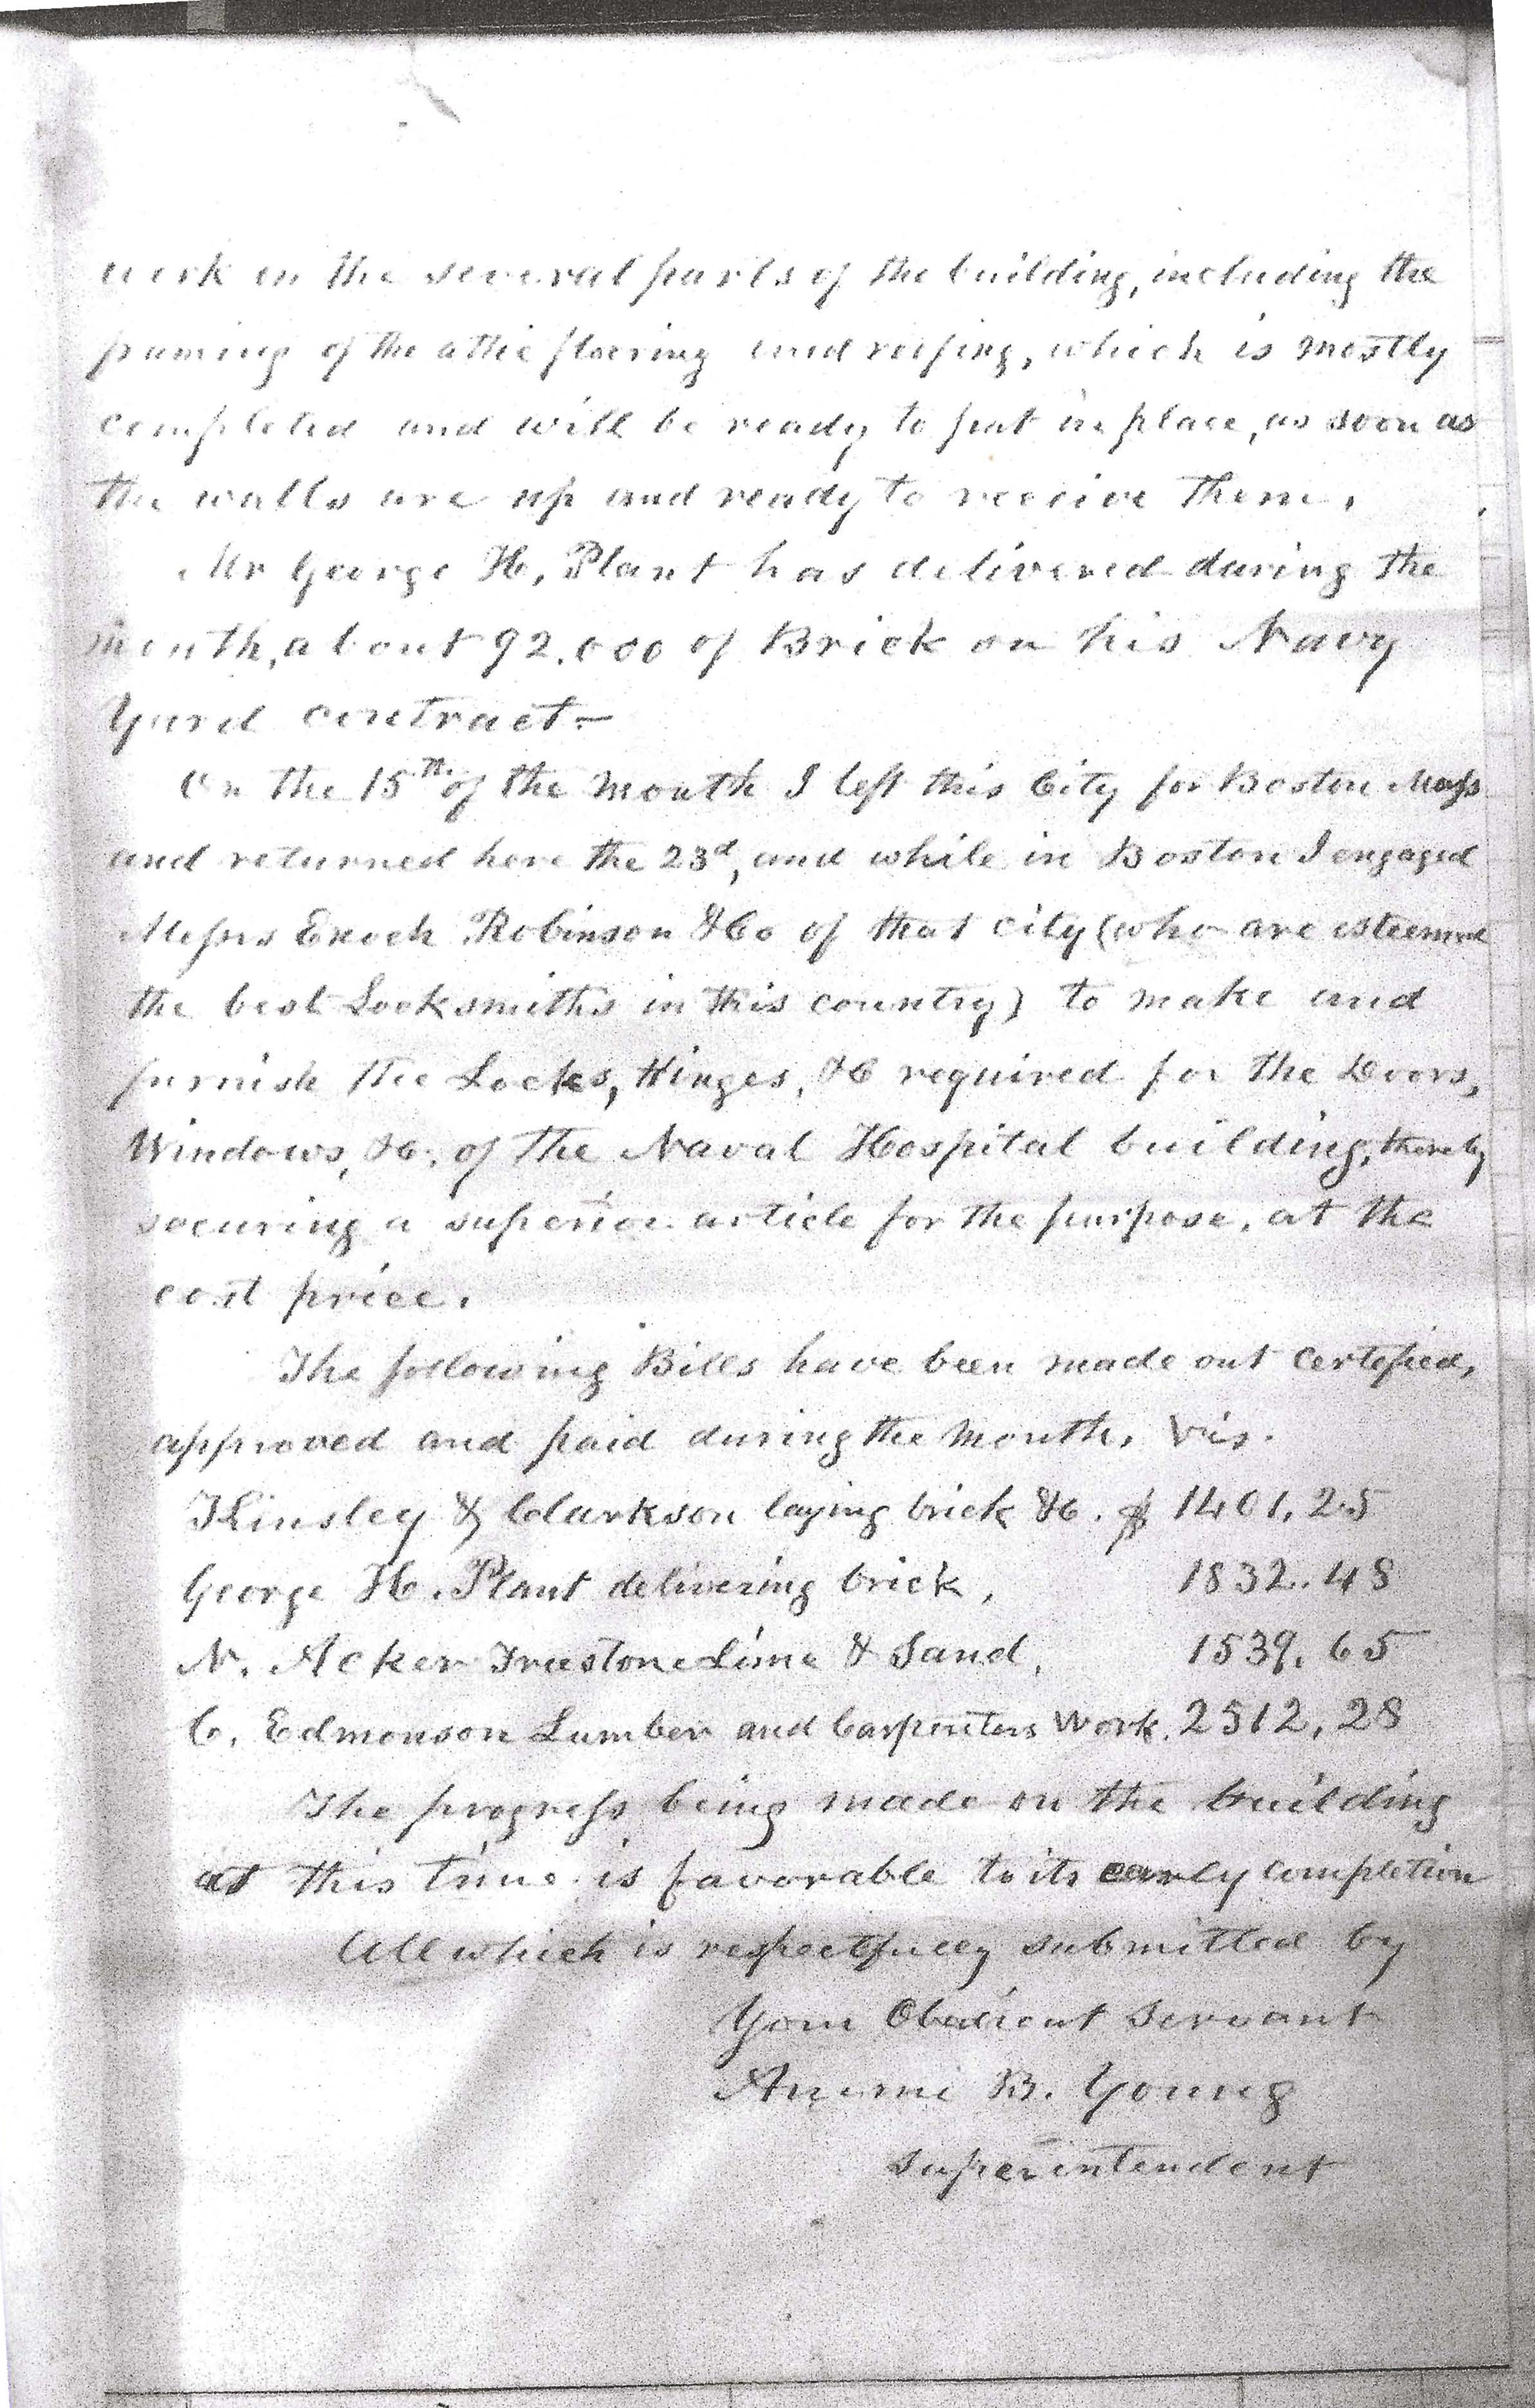 Monthly Report of the Superintendent of Construction, June 1, 1865, Page 2 of 2